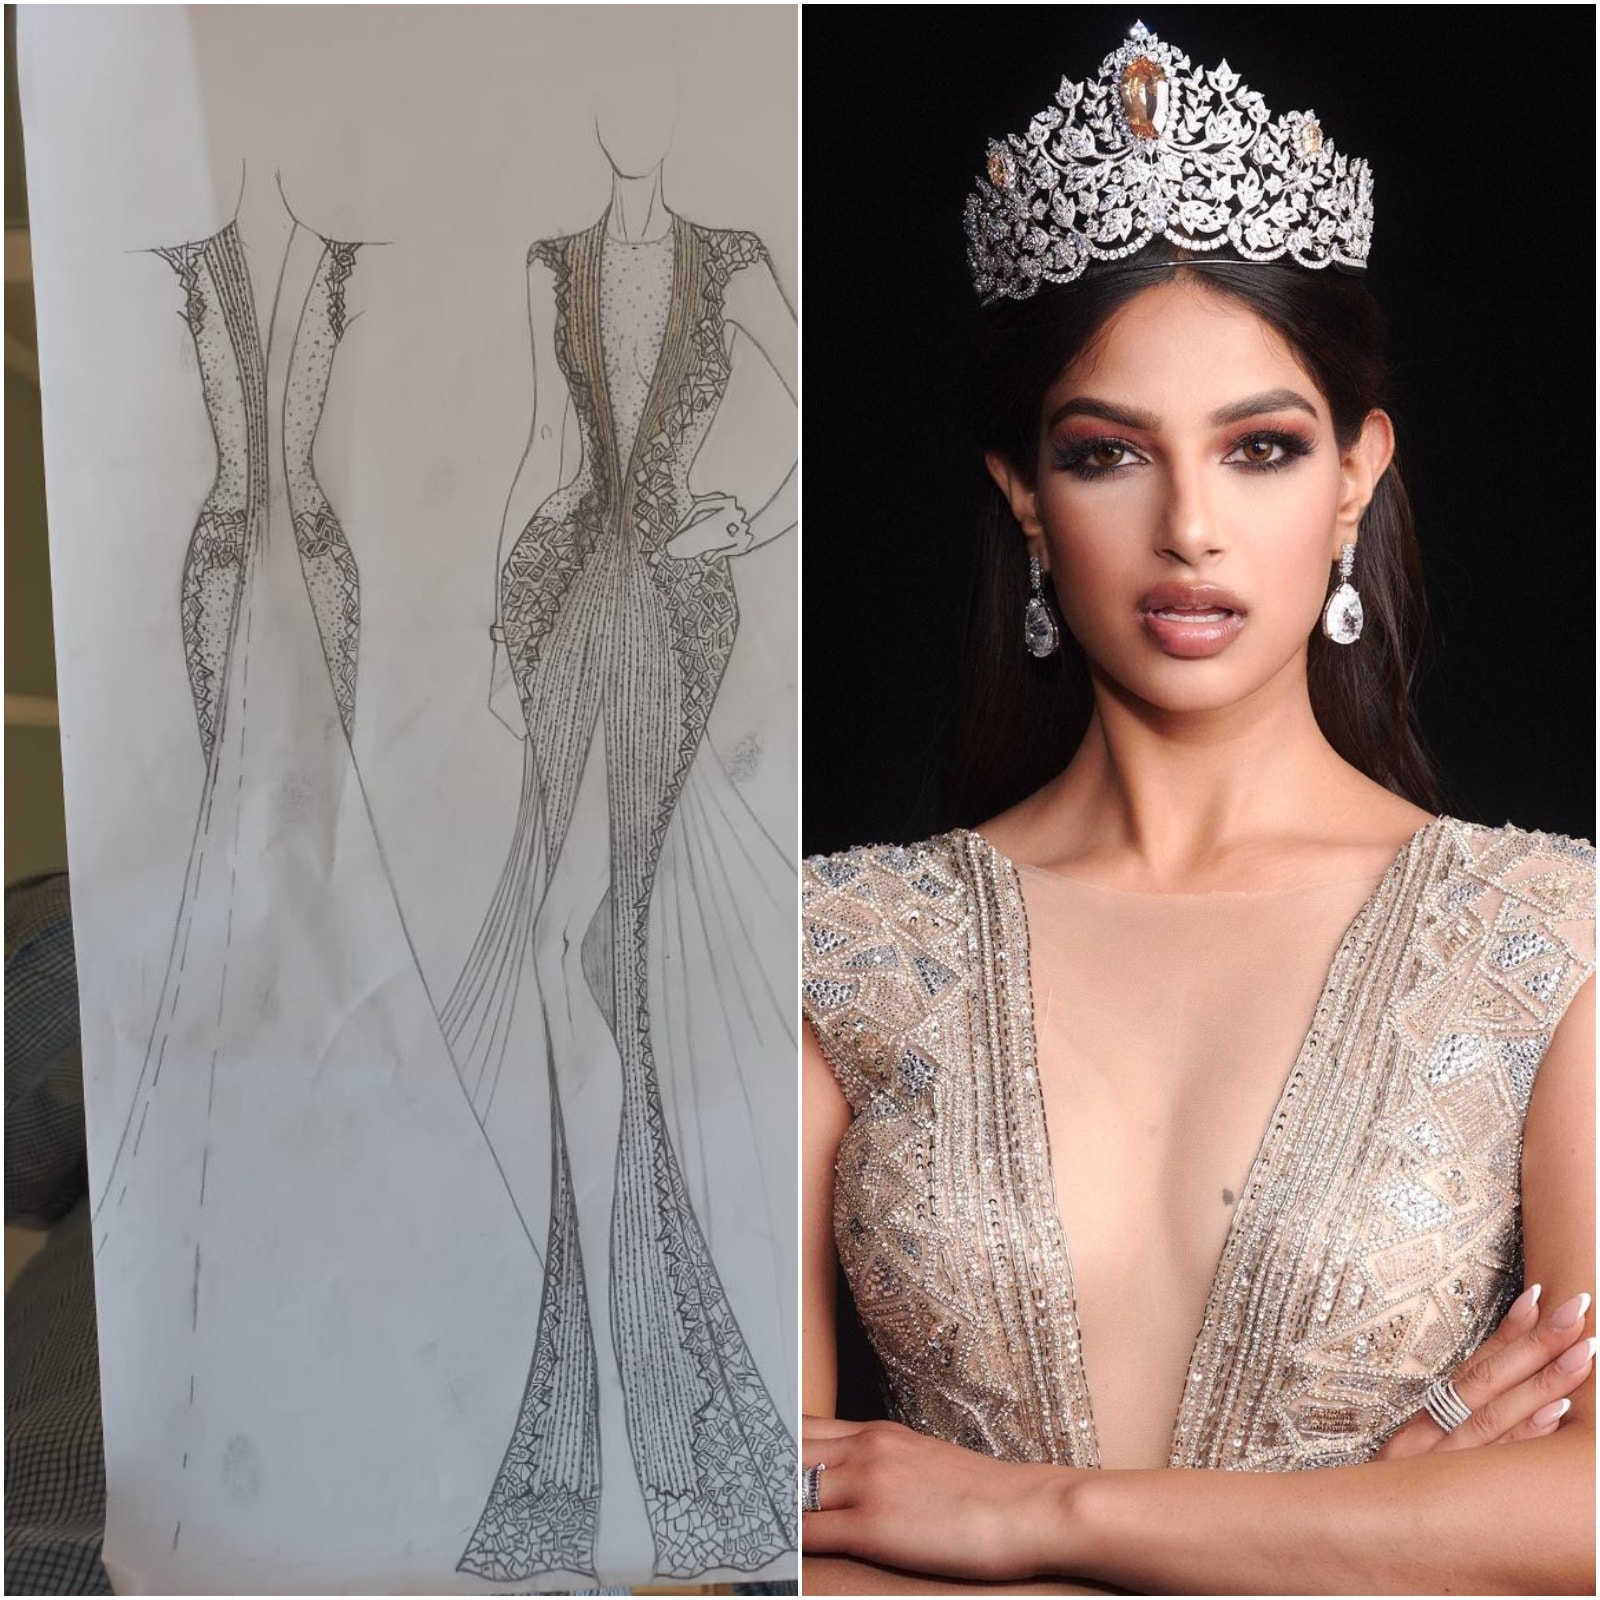 Pageant Trend - Our Miss Universe 2021 Harnaaz Sandhu